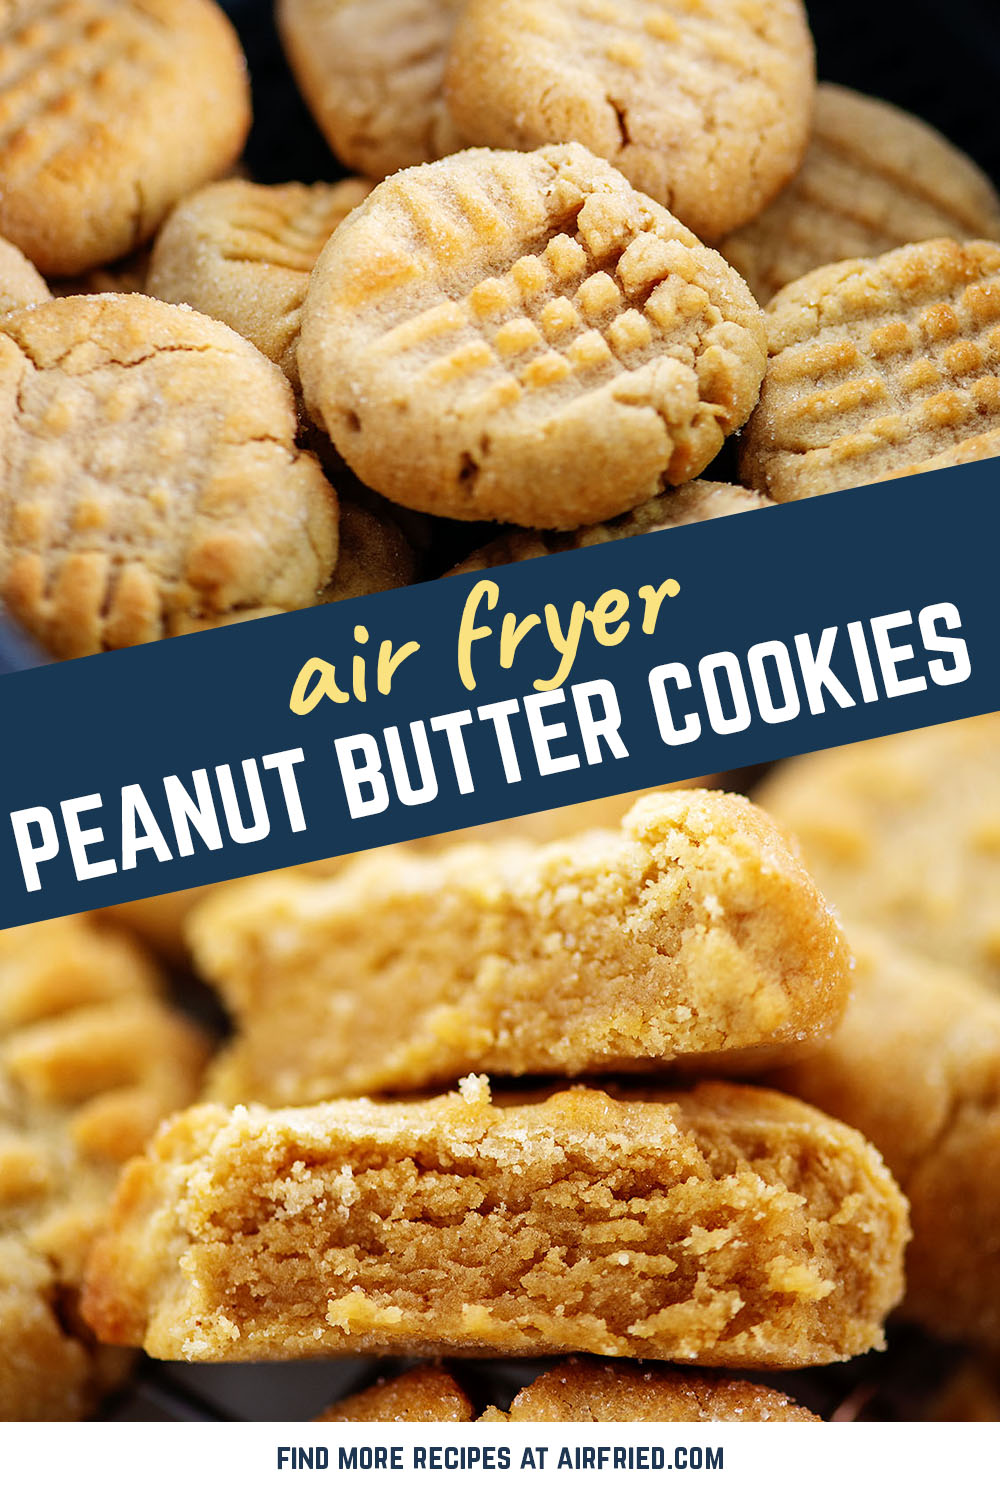 You can use your air fryer to bake almost anything!  Try out these soft in the center peanut butter cookies!